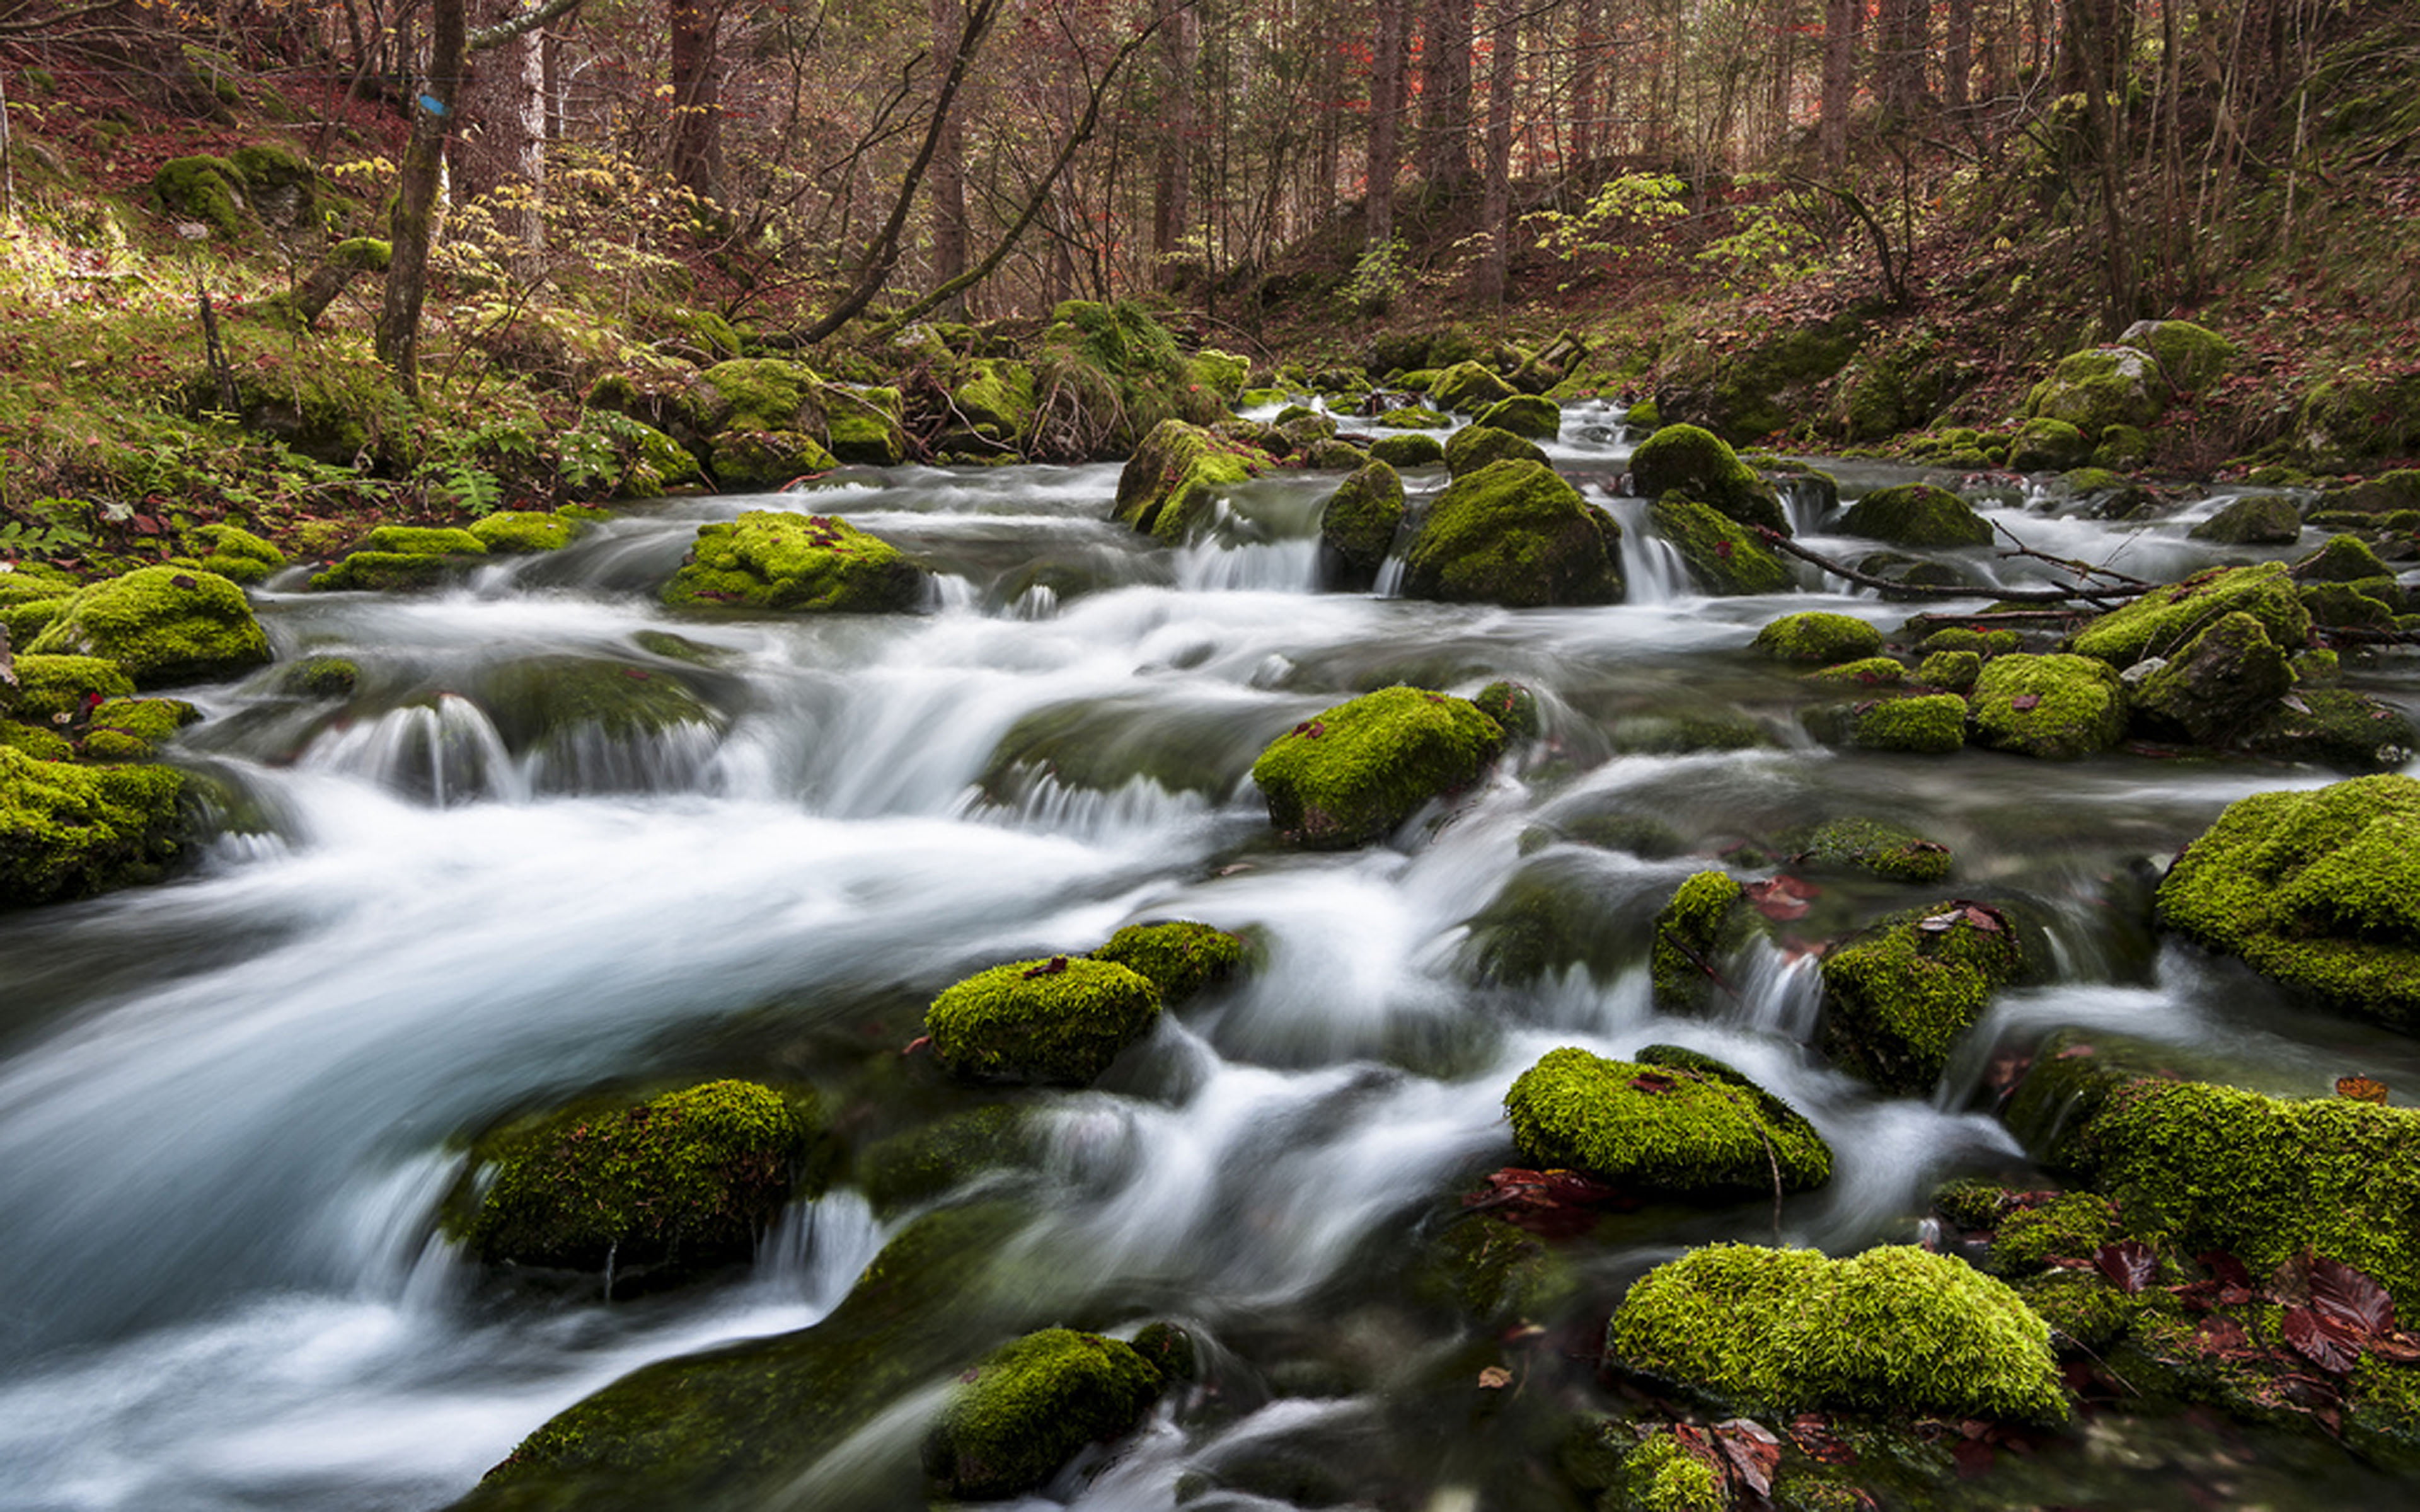 Beautiful Wallpaper Hd Resolution, High Contrast, Fast Mountain River Clear Water And White Stones With Green Moss Forest Trees Desktop Wallpaper Hd For Mobile Phones And Laptops